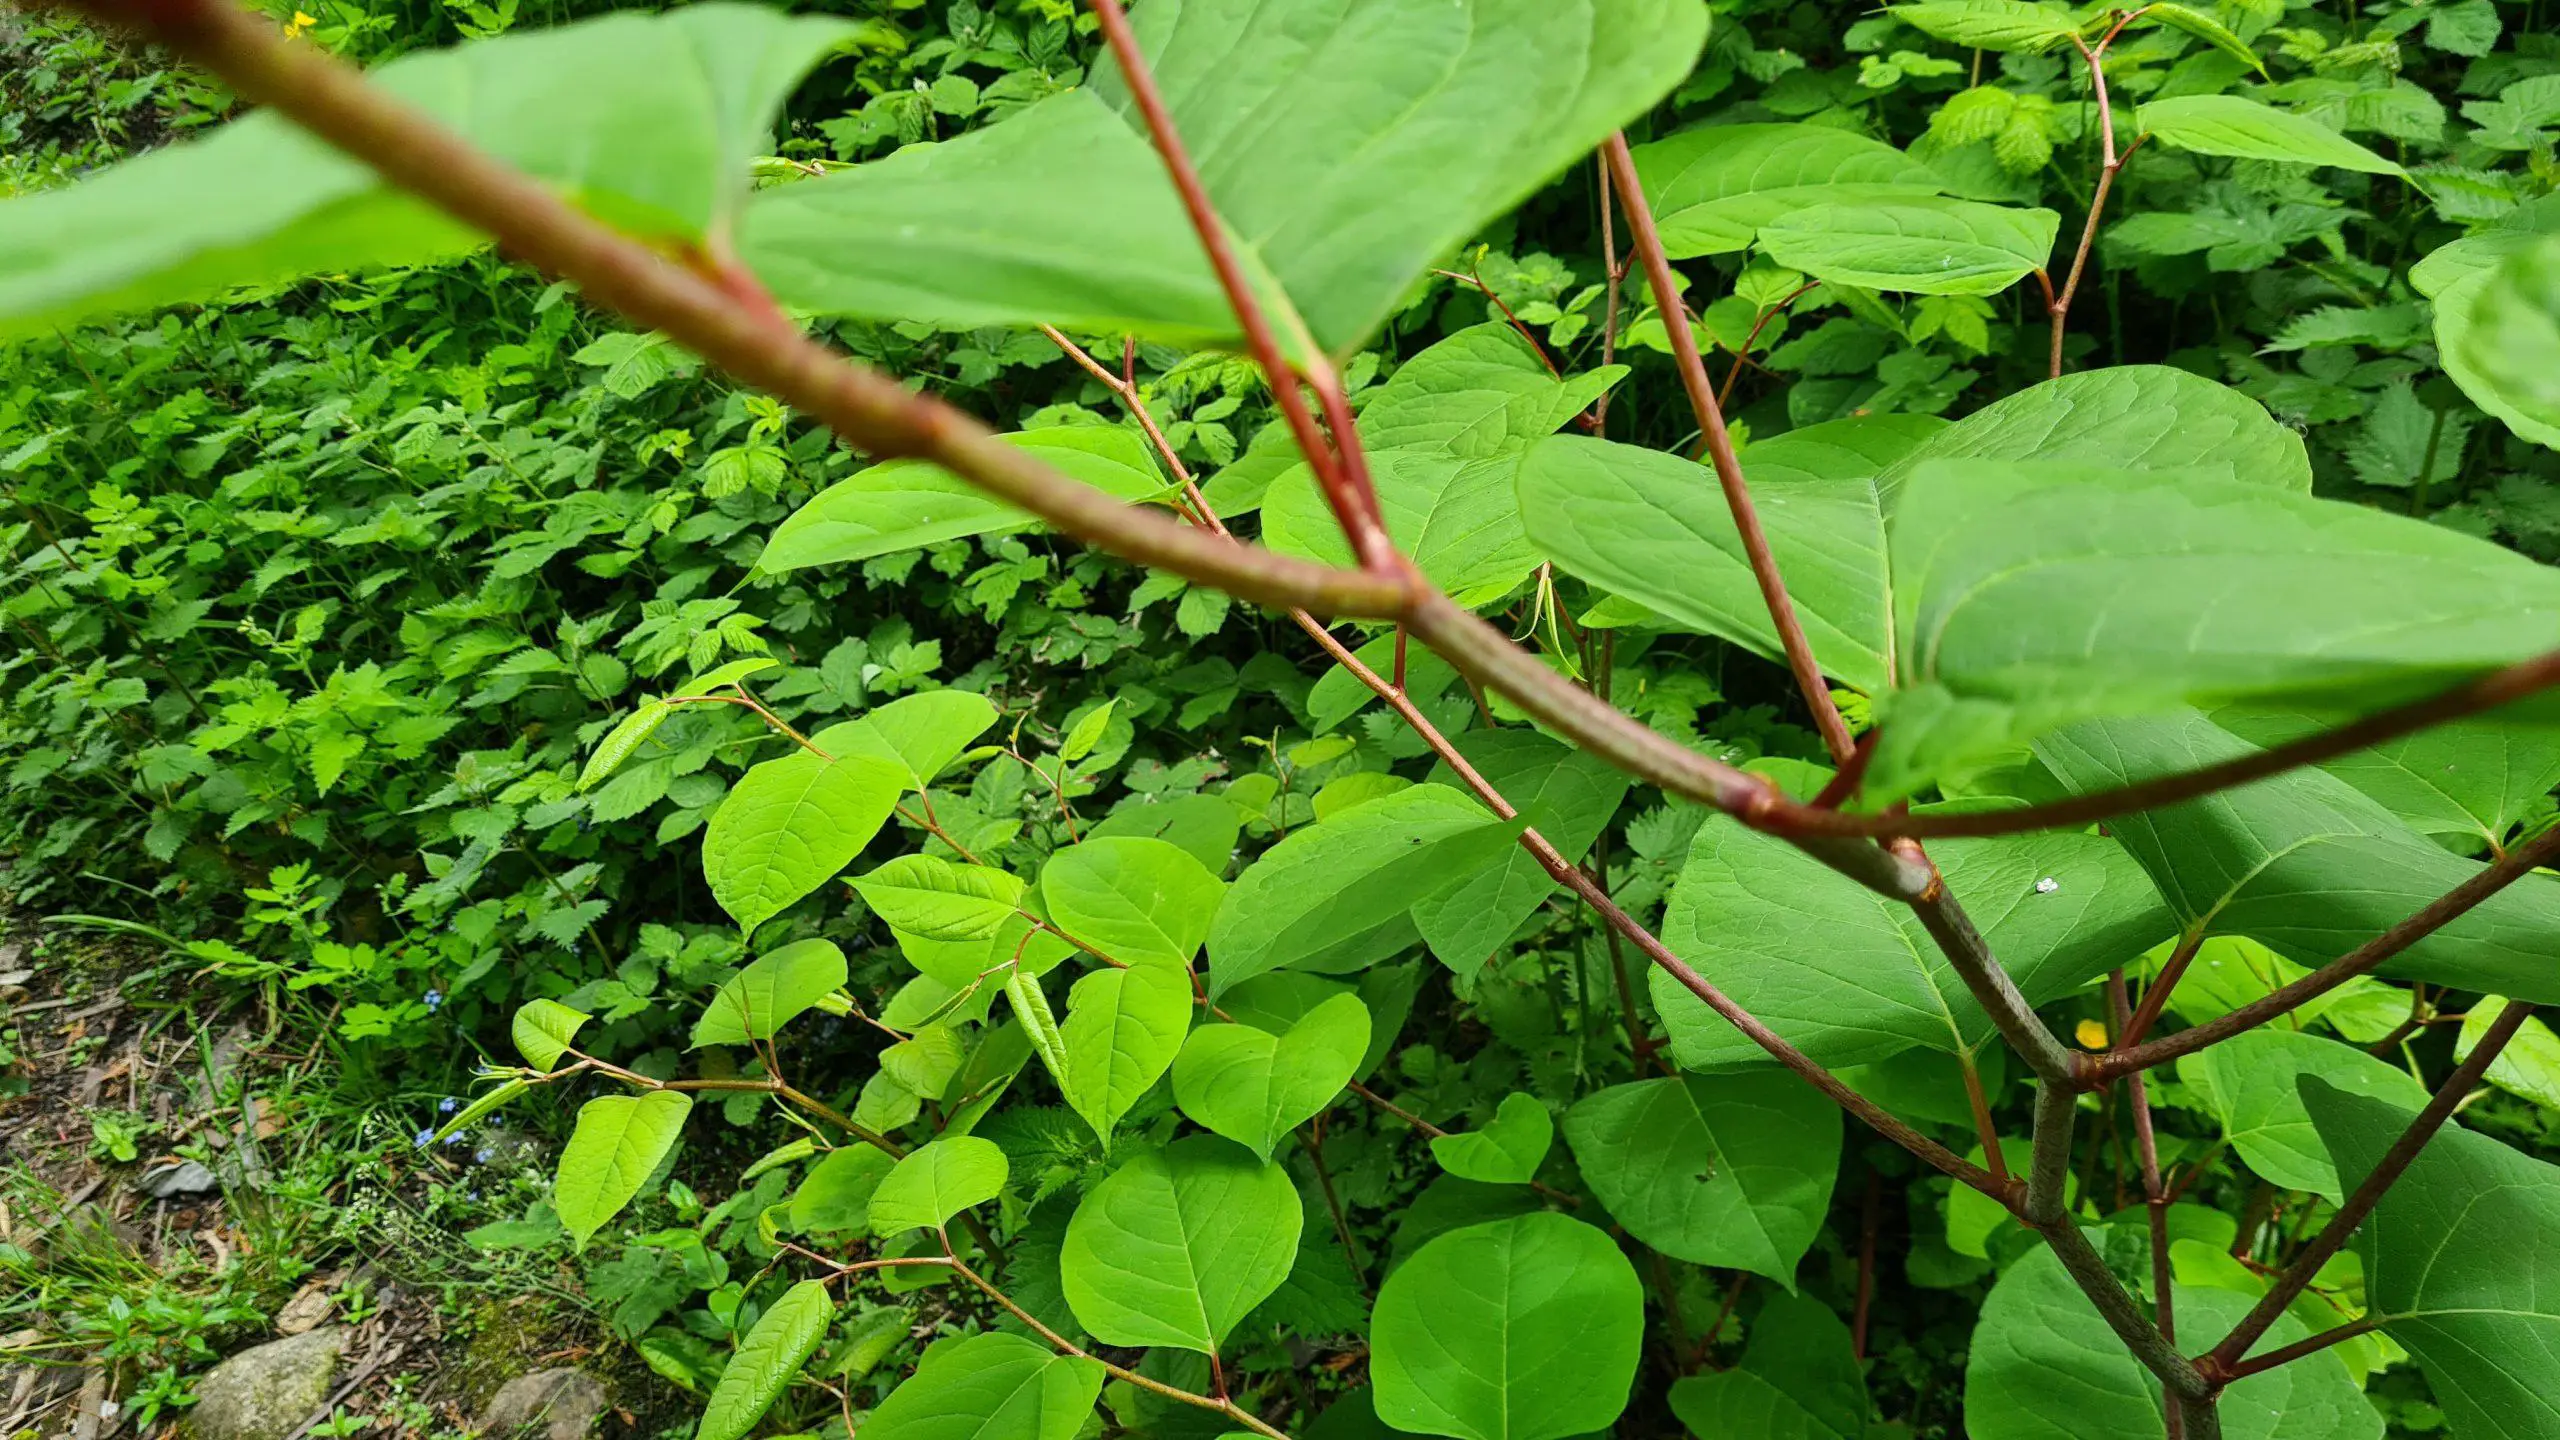 The growth of Japanese knotweed forms an impenetrable wall preventing anything else from growing